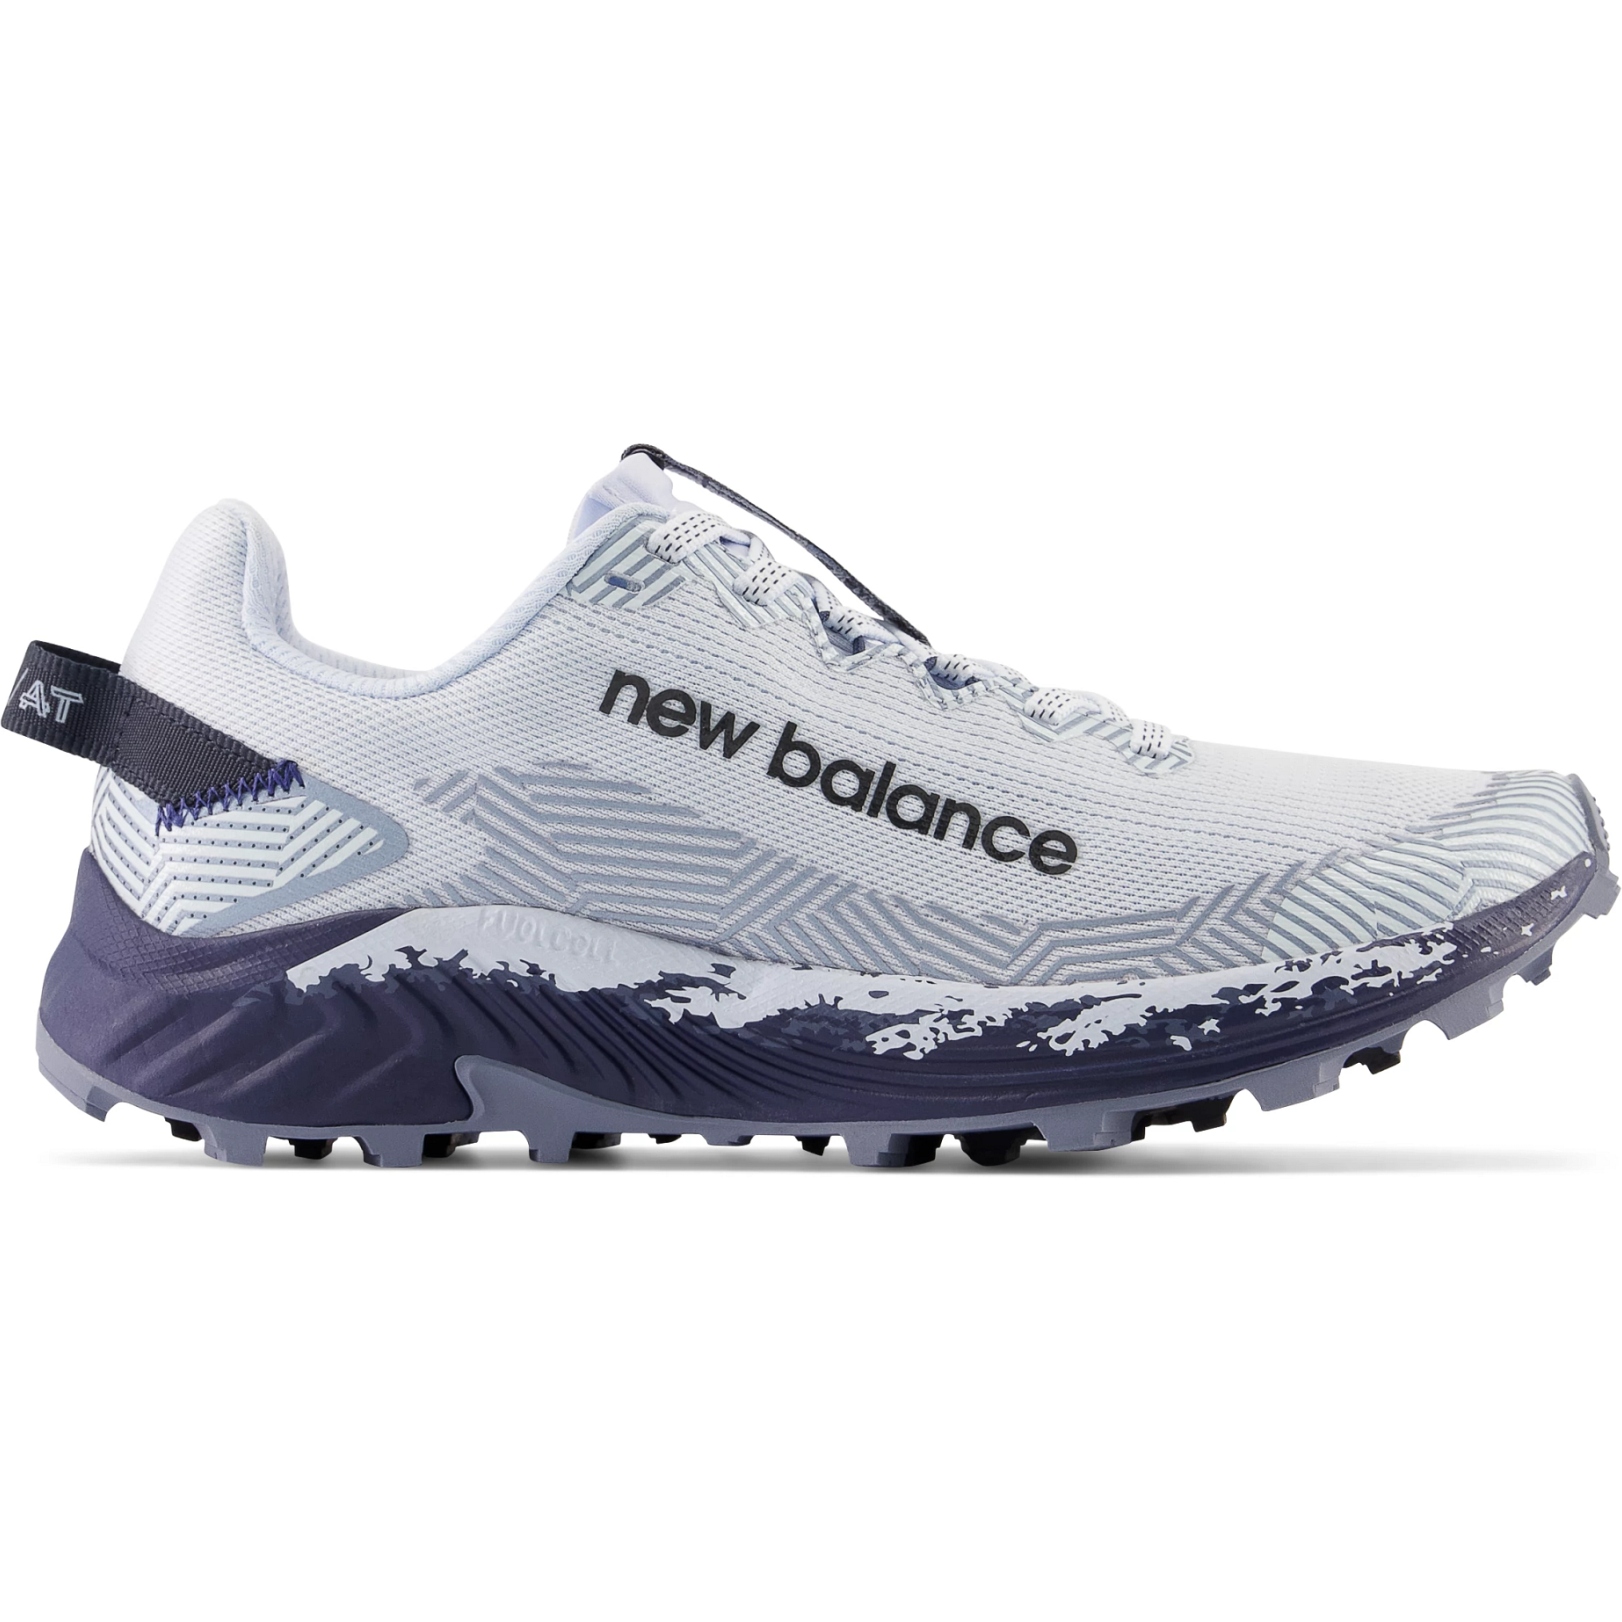 Productfoto van New Balance Fuelcell Summit Unknown v4 Trail Running Schoenen Dames - Blue/Outerspace